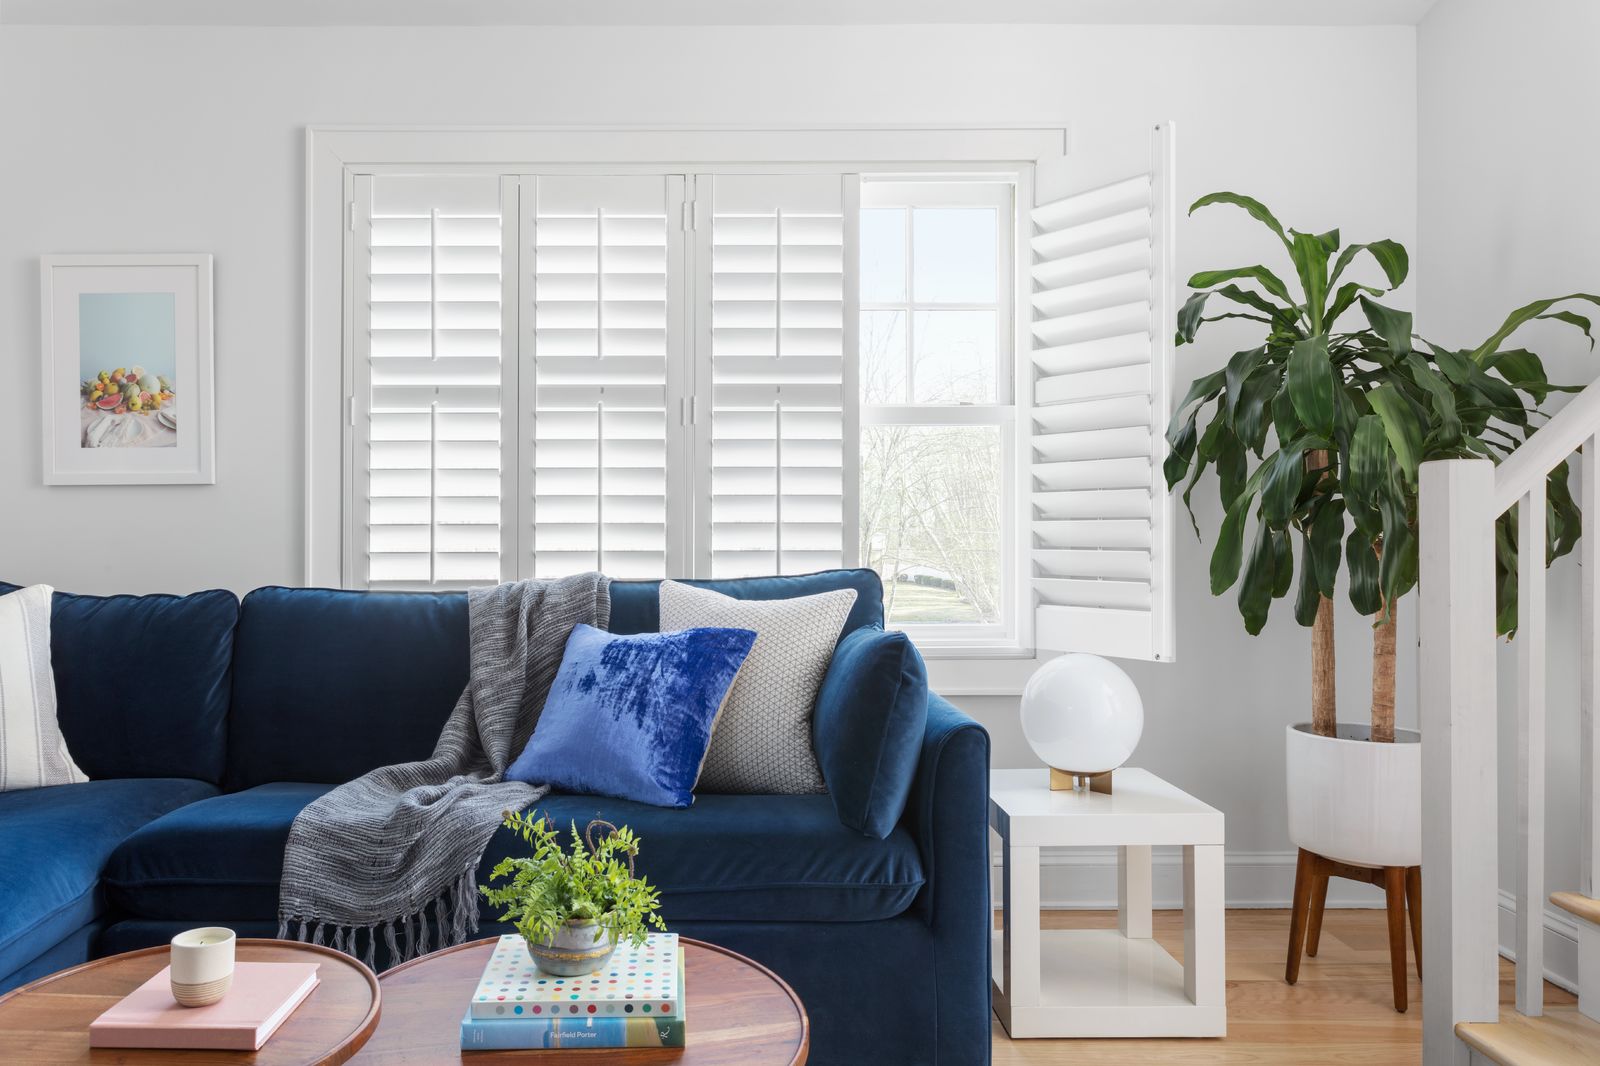 A trendy living room with a blue couch glowing by sunlight streaming through white Plantation shutters.